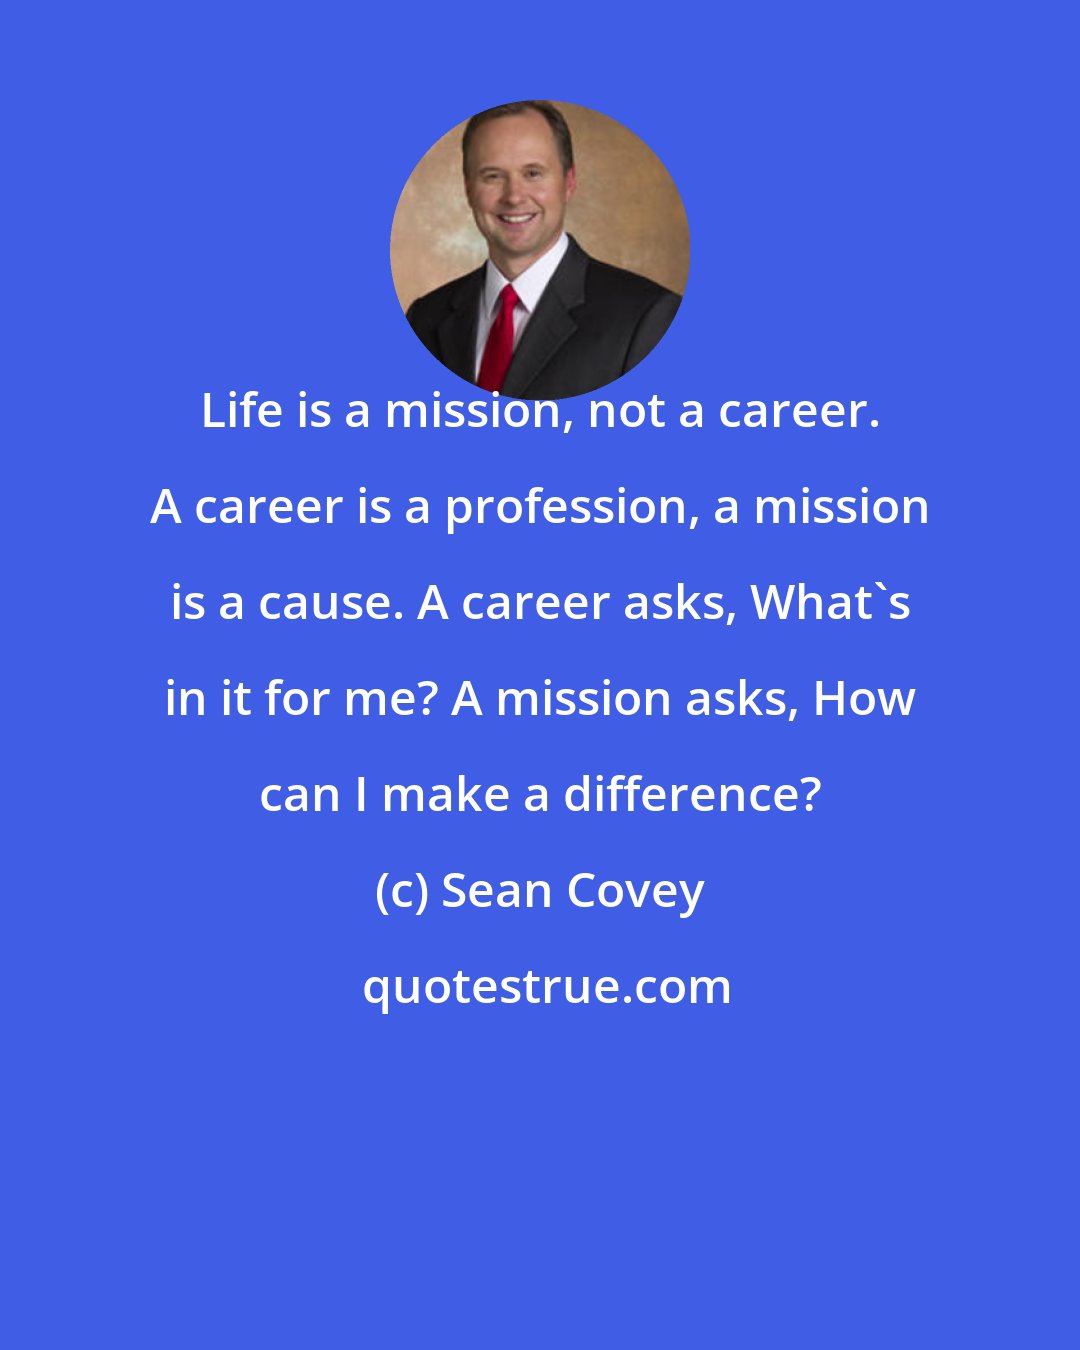 Sean Covey: Life is a mission, not a career. A career is a profession, a mission is a cause. A career asks, What's in it for me? A mission asks, How can I make a difference?